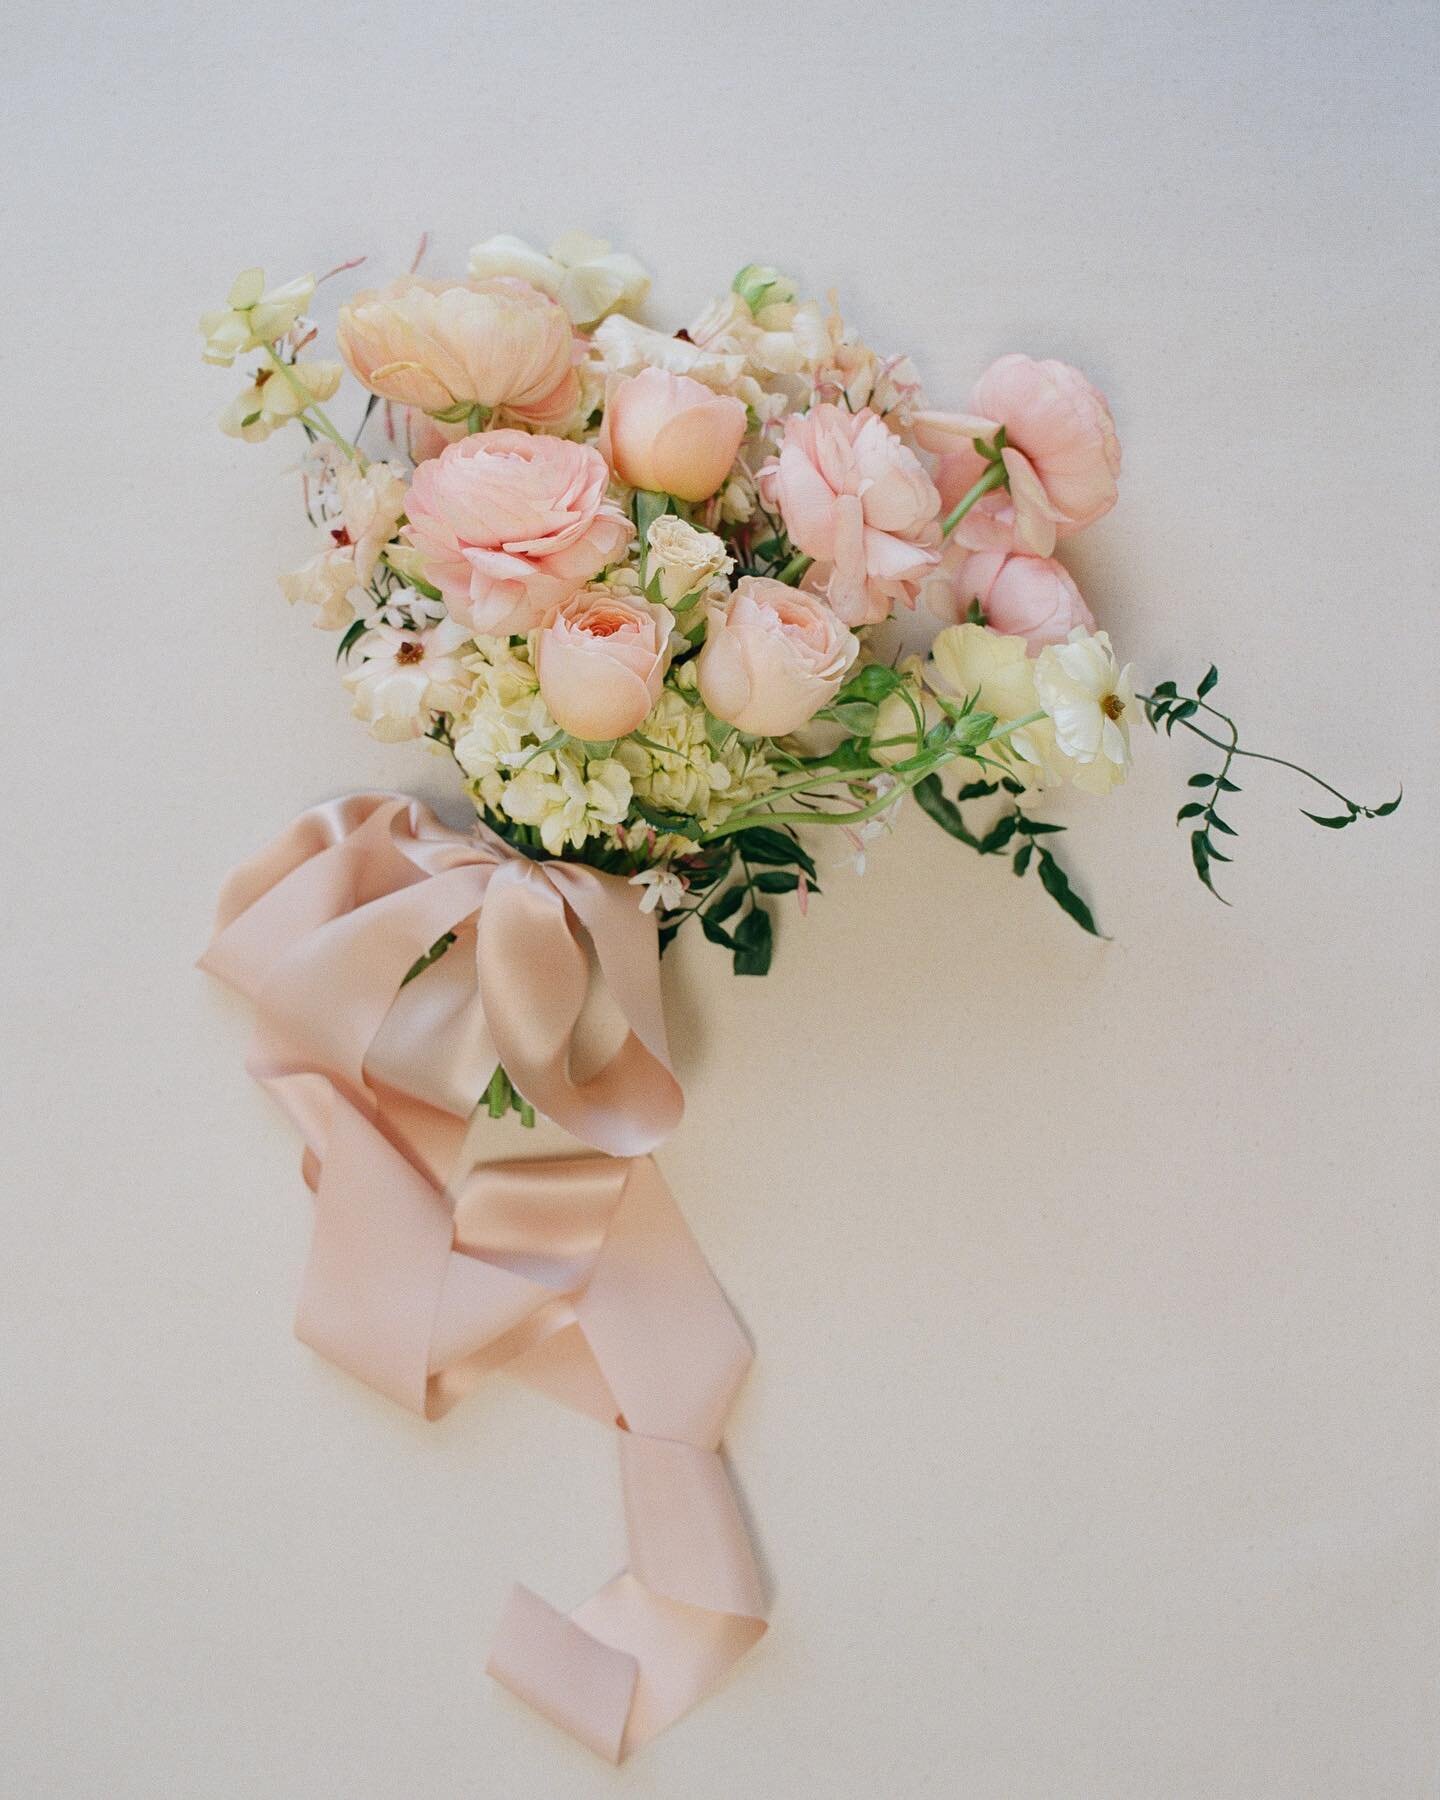 Just a bit obsessed with the first ever bouquet I made 😍
Had to get it on film 🎞️ 
Of course I was guided by the amazing @espritfloralco 

Model: @kate_sands_ 
Studio: @espritfloralco 
Styling mat: @chasingstone